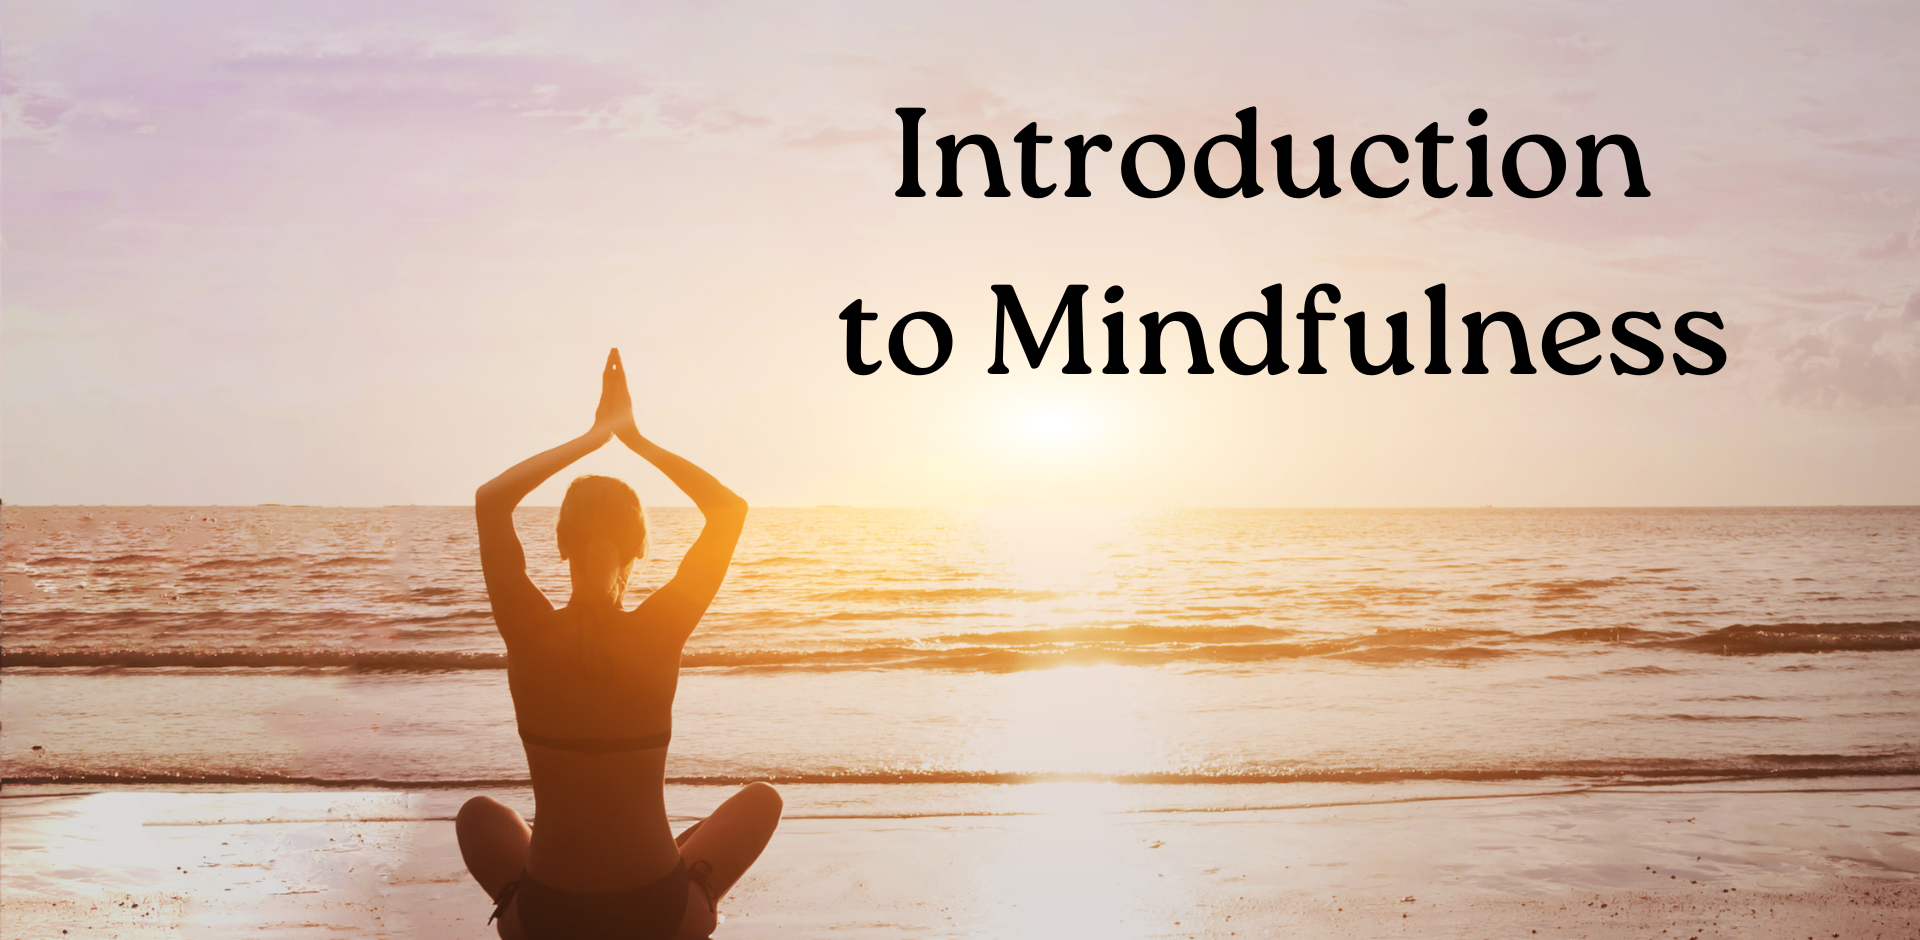 Staying Calmly Active and Actively Calm: Introduction to Mindfulness